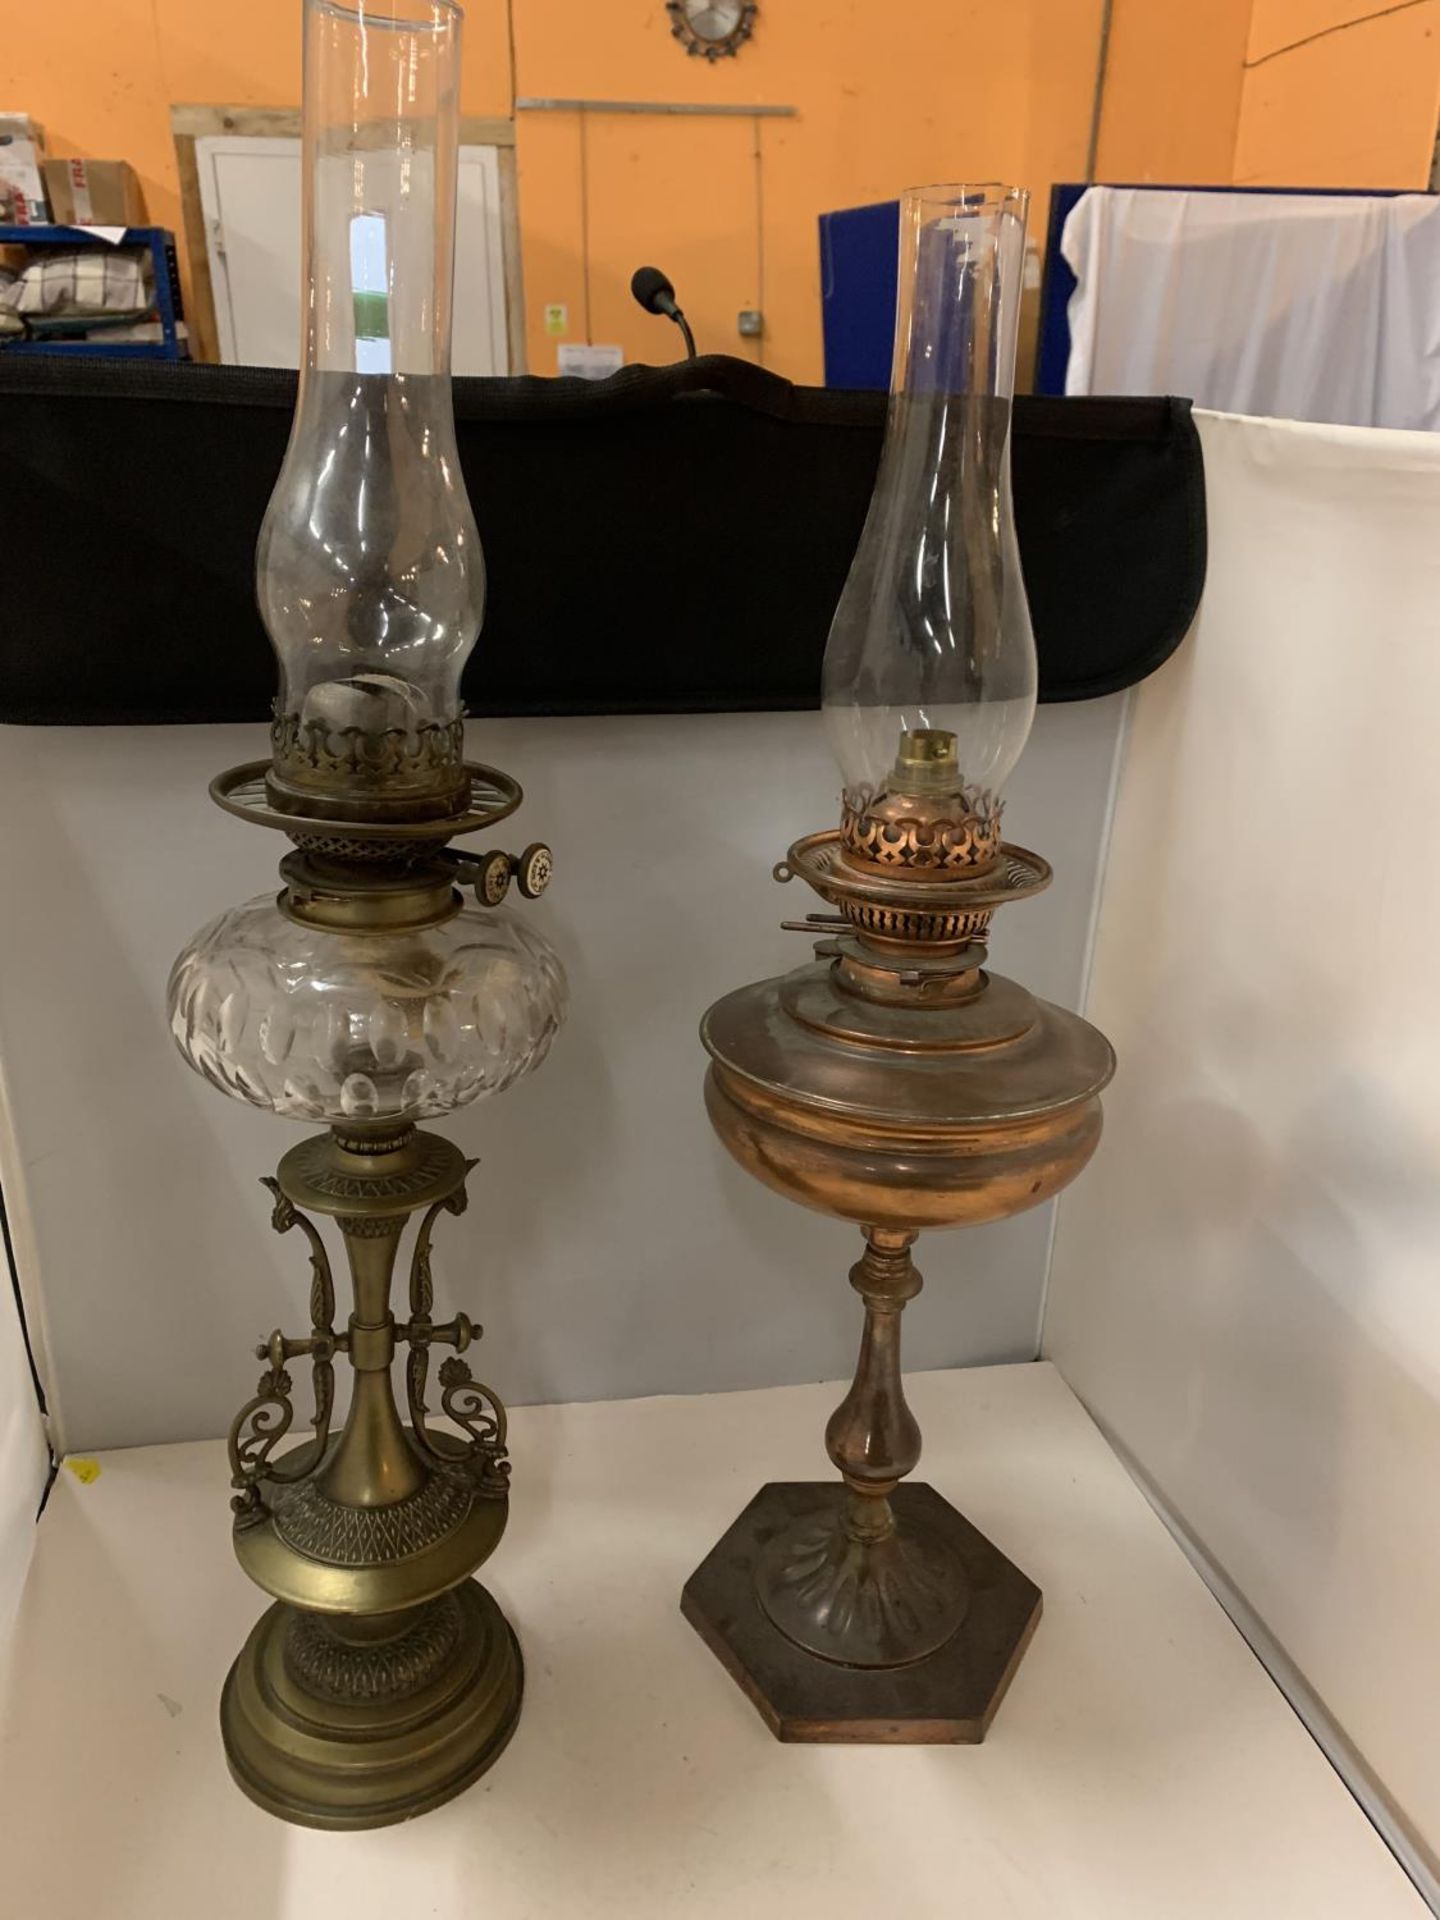 TWO DECORATIVE OIL LAMPS, ONE COPPER EXAMPLE, ONE DECORATIVE 'JAMES HINKS & SONS' BRASS AND GLASS